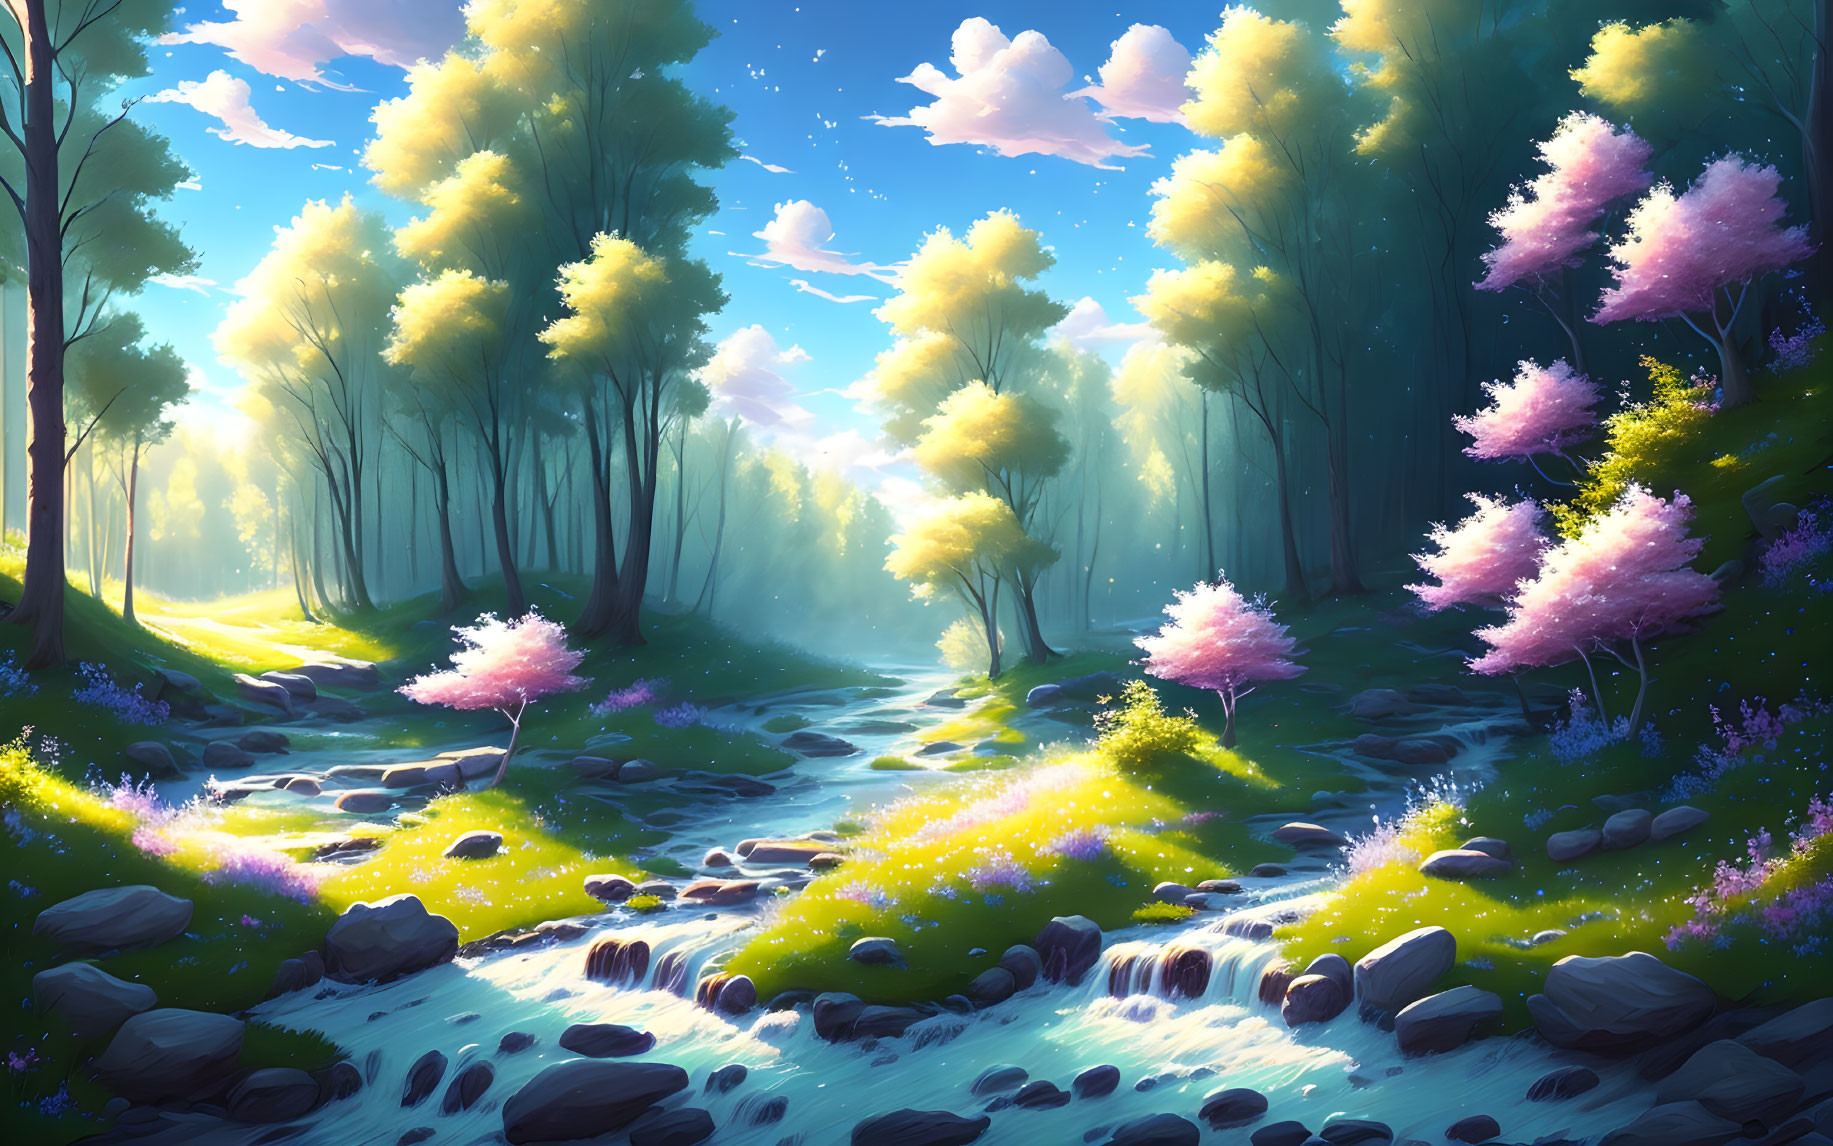 Enchanting forest scene with babbling brook and pink blooming trees